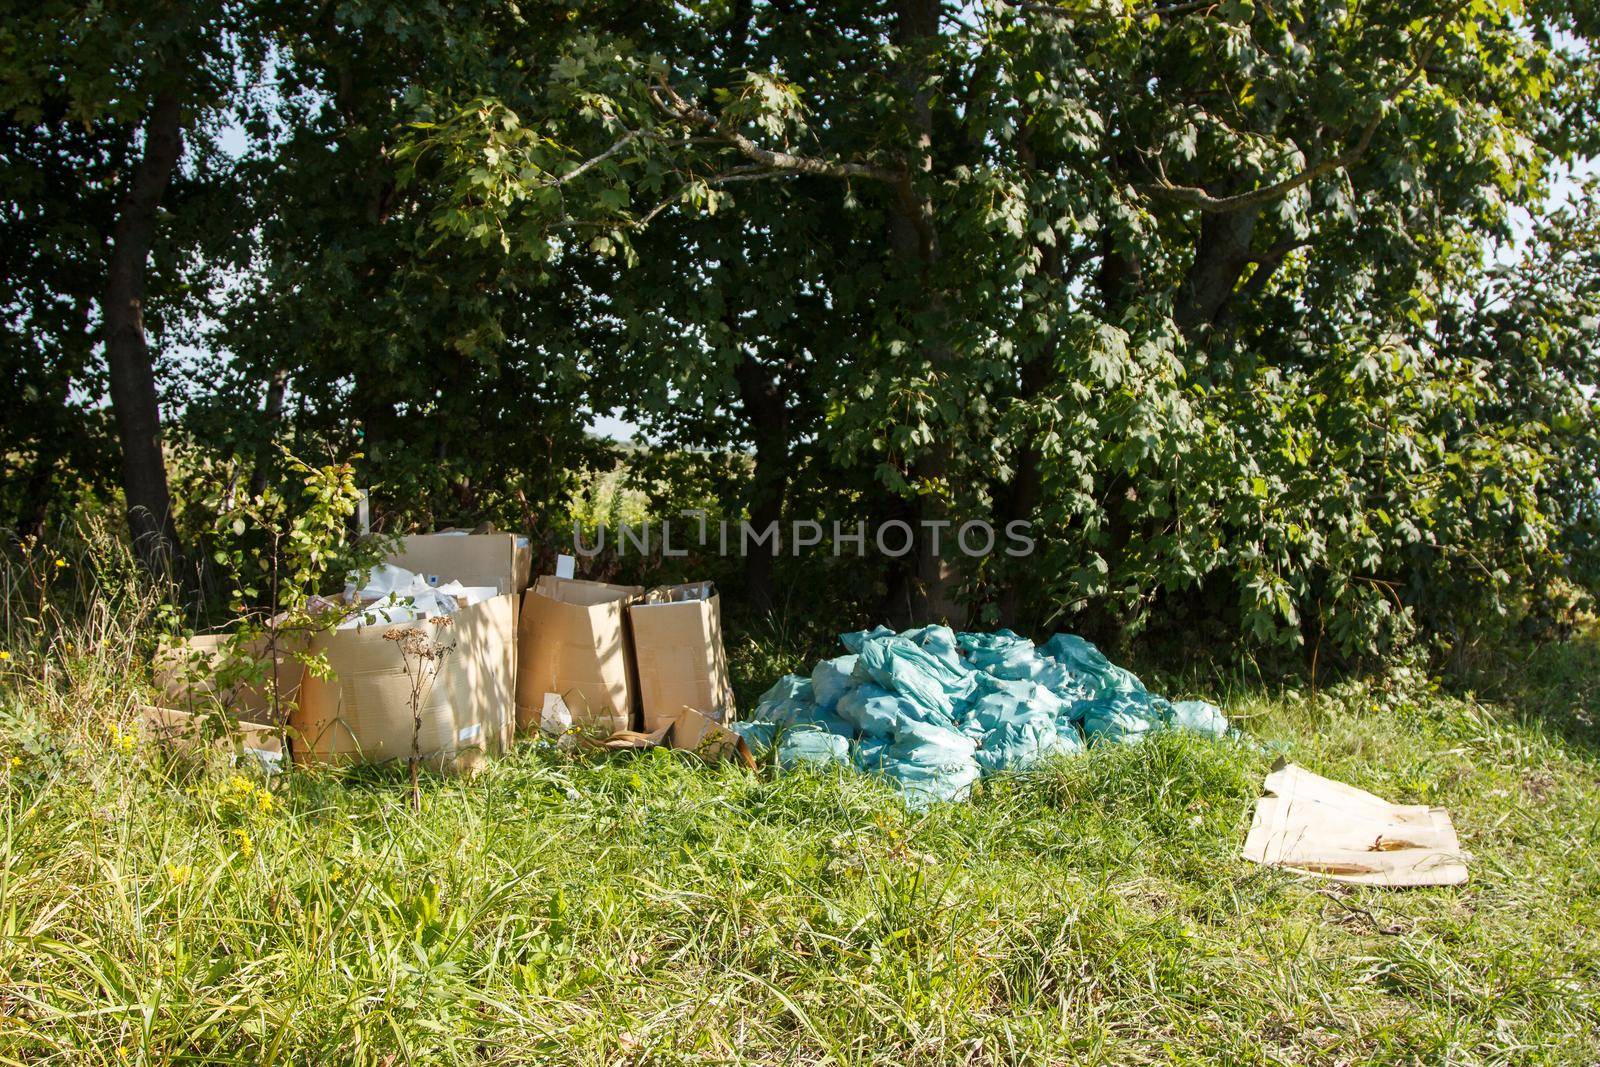 unauthorized garbage dump in the forest by raddnatt